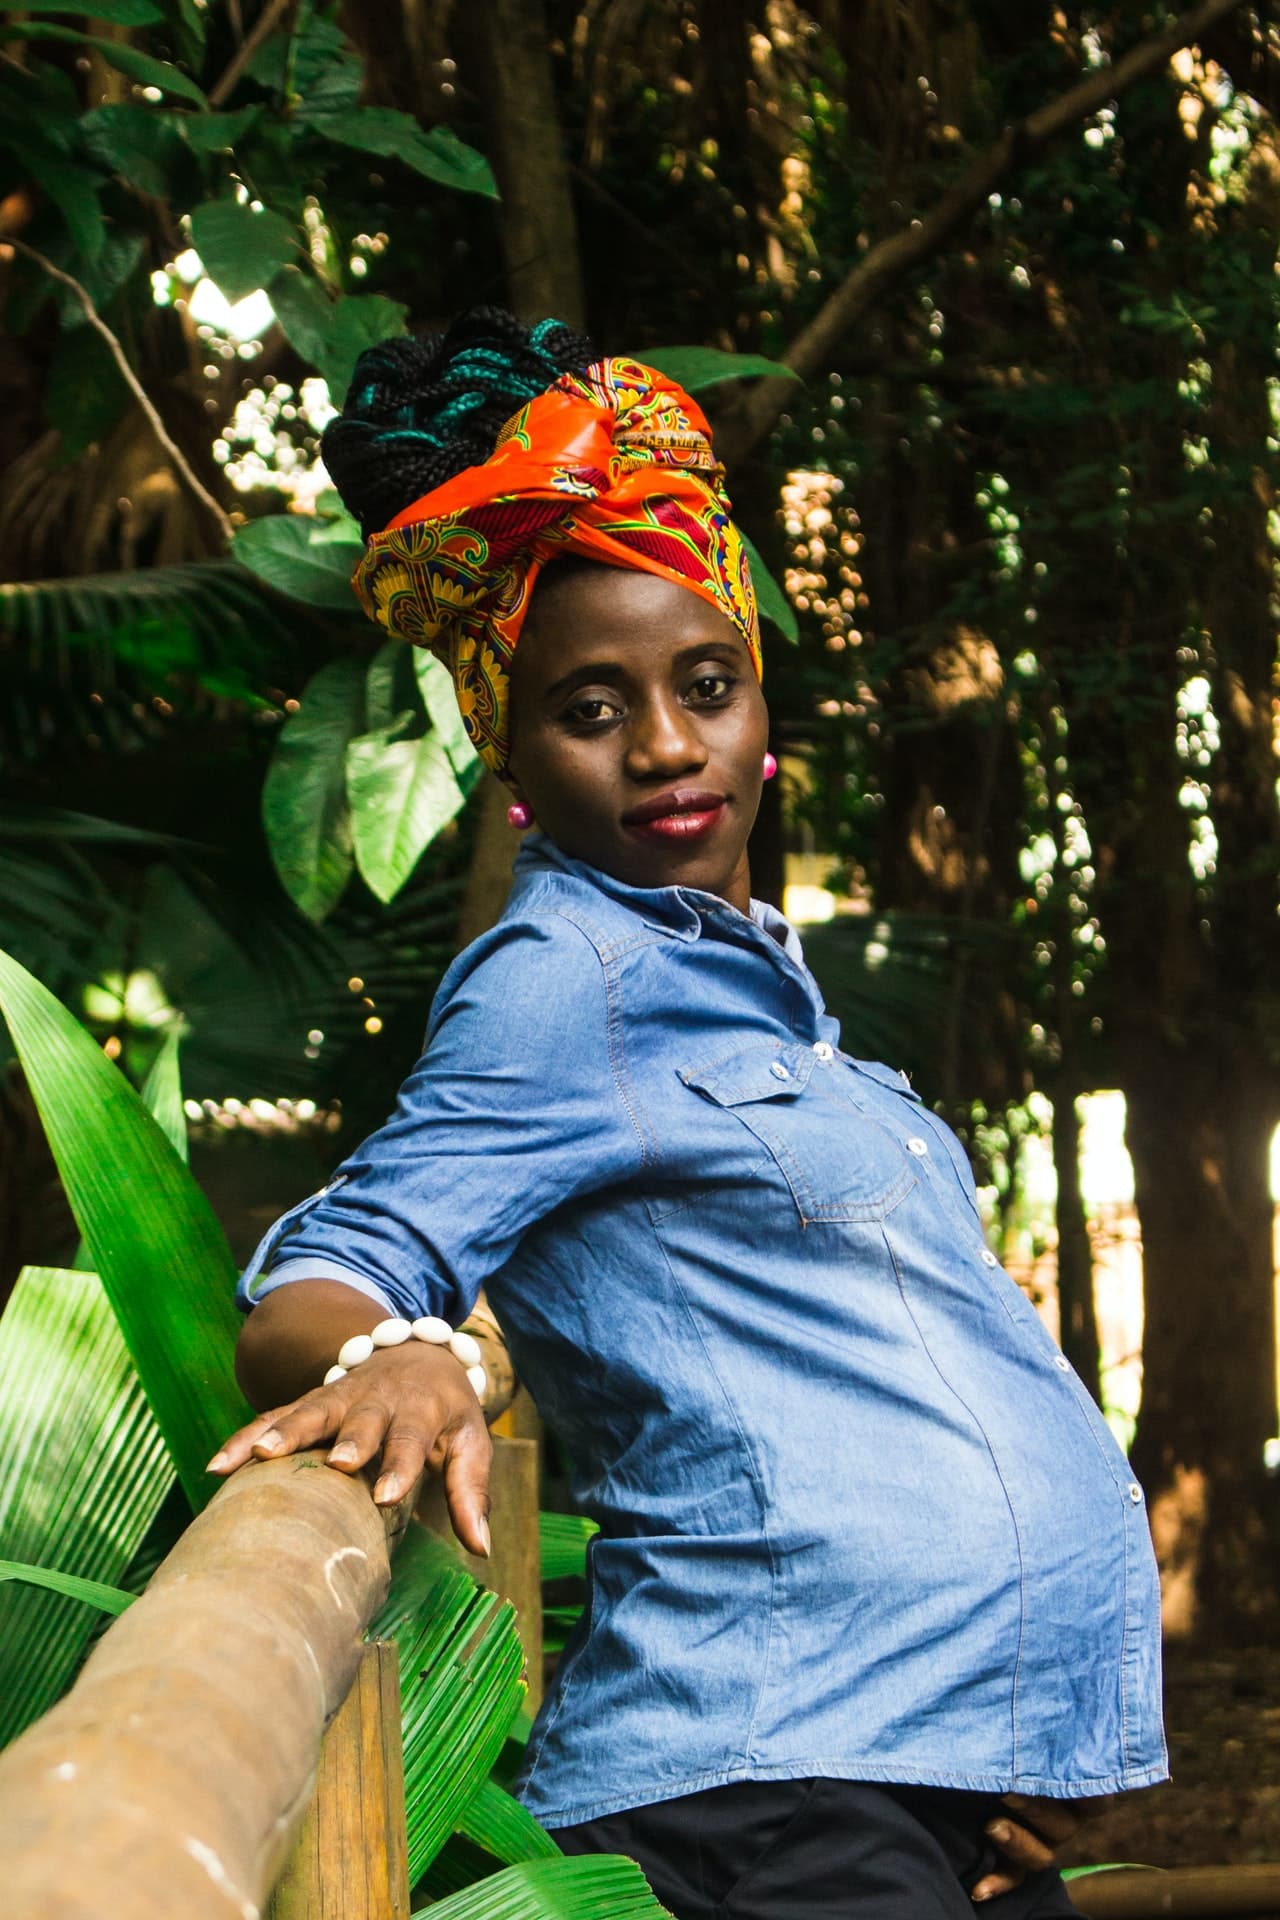 Pregnant woman poses in front of a fence outdoors. She is a Black woman in a blue button down and a red head wrap.